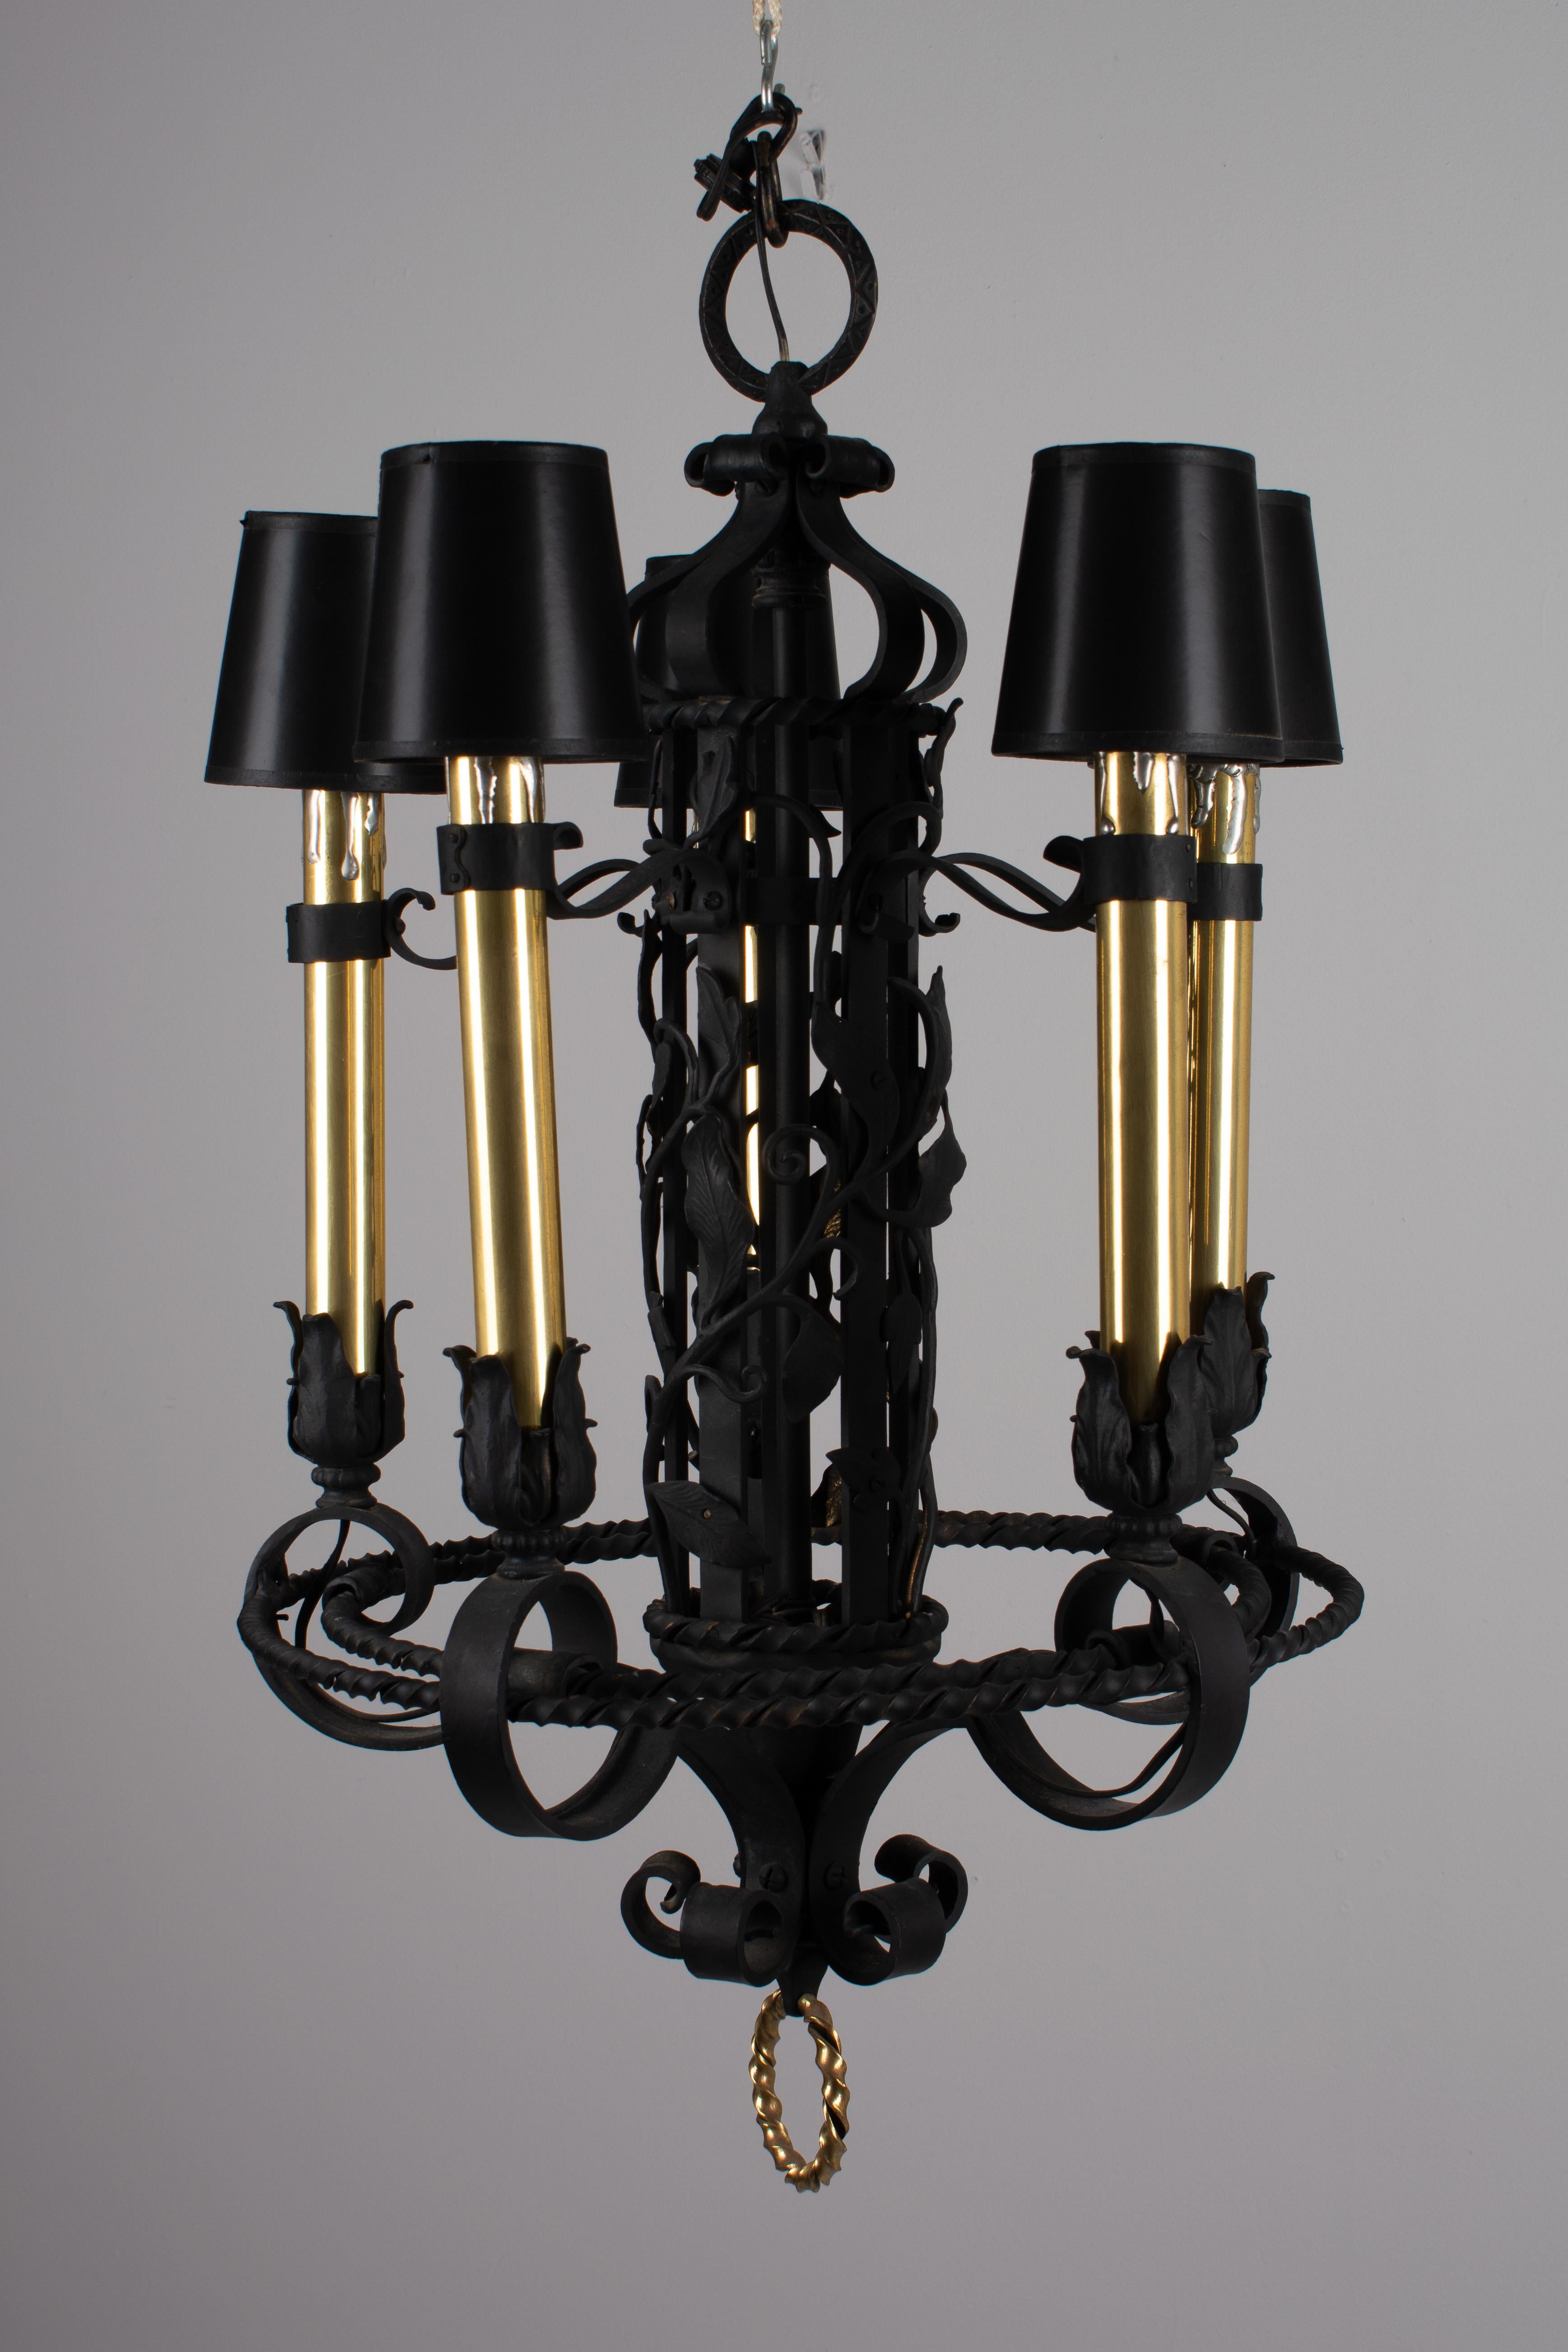 A pair of large French five-light wrought iron chandeliers. Beautifully crafted iron work with a central column entwined in vines and leaves and surrounded by five tall  solid brass candles. Old black shades with gold foil lining might need to be